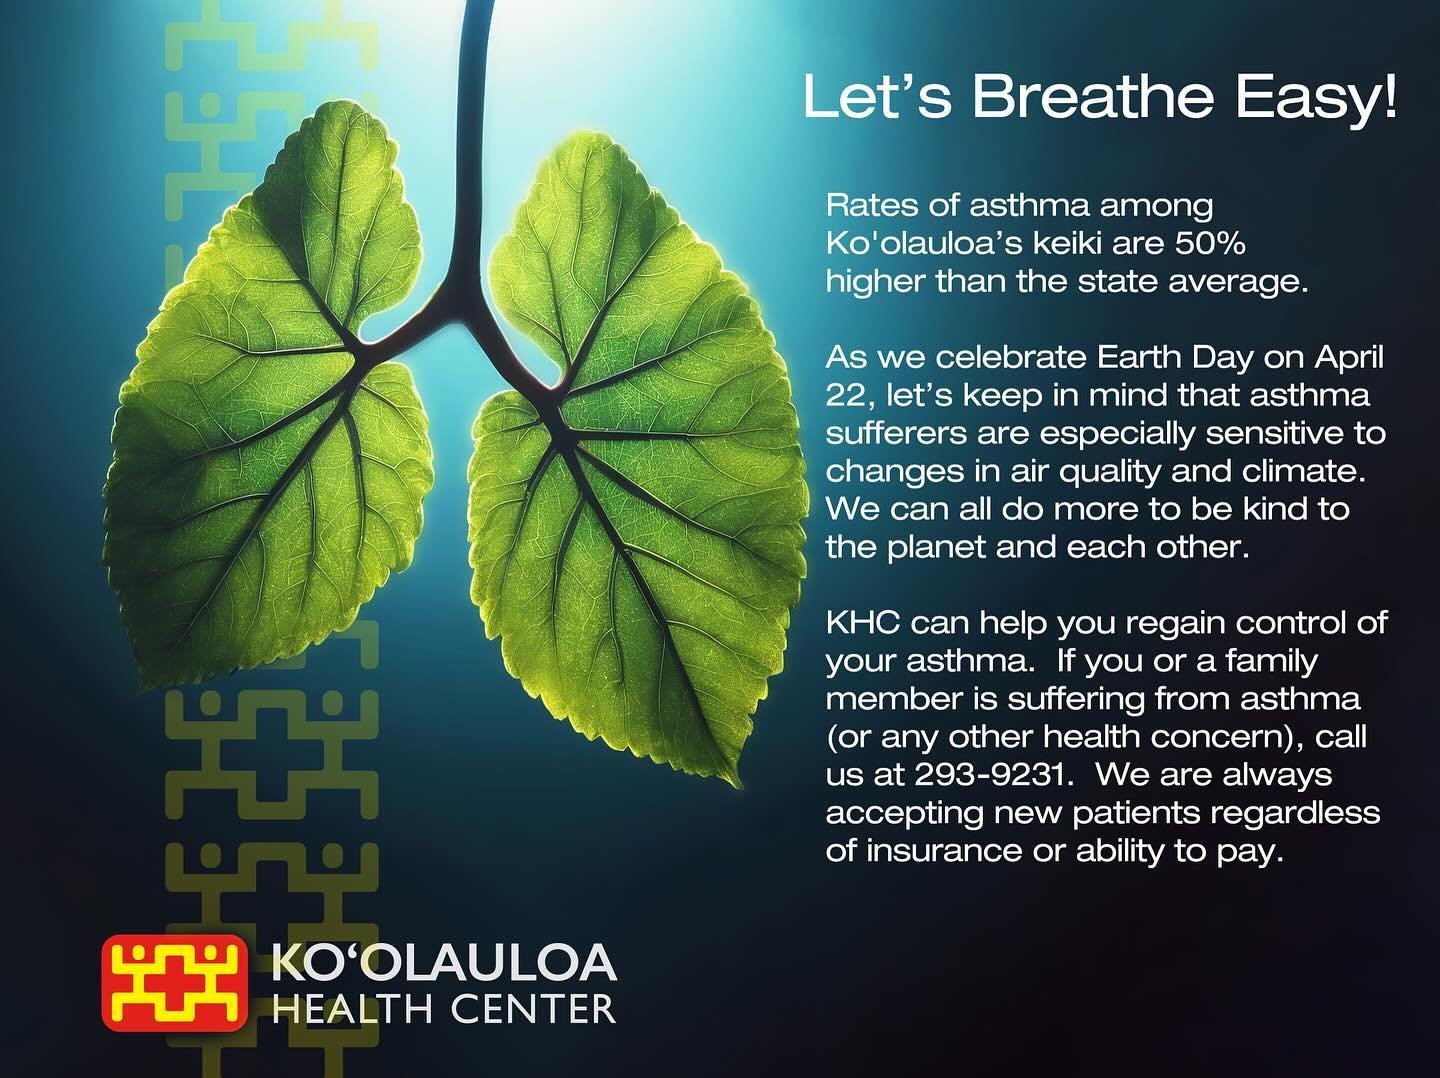 Aloha Ohana,

Rates of asthma among Ko&rsquo;olauloa&rsquo;s keiki are 50% higher than the state average.

As we celebrate Earth Day on April 22, let&rsquo;s keep in mind that asthma sufferers are especially sensitive to changes in air quality and cl